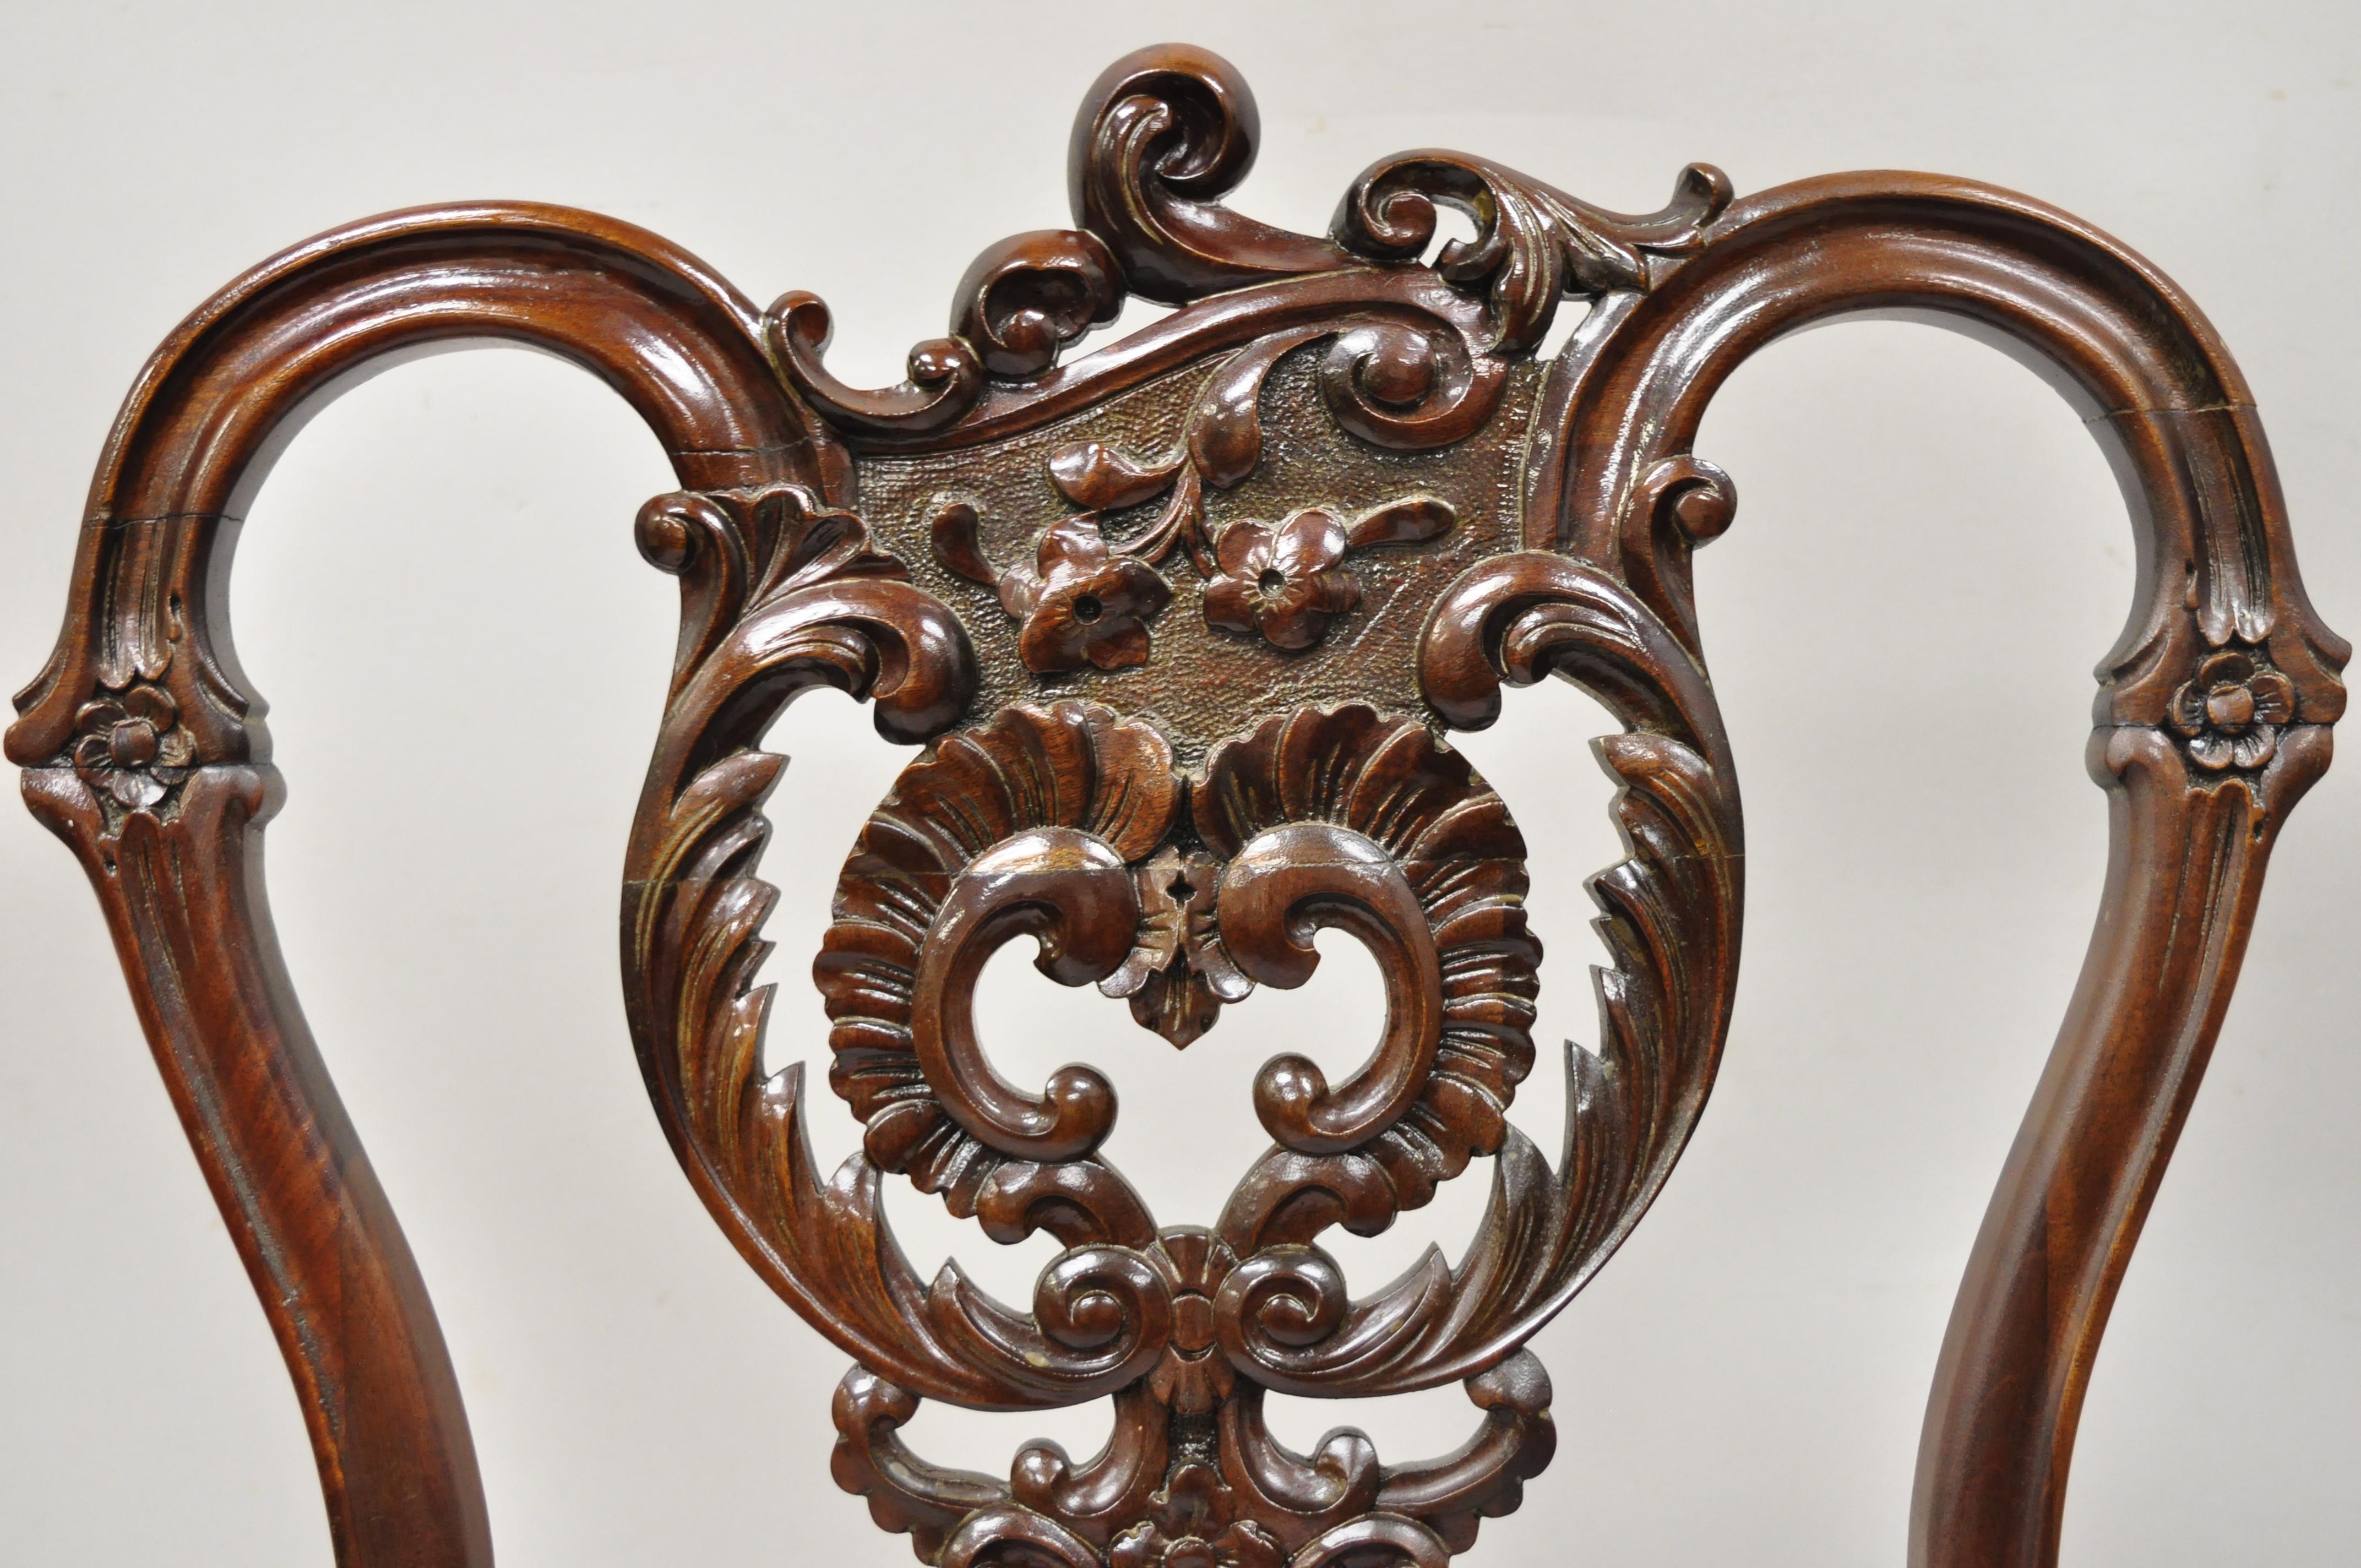 North American Antique Victorian Floral Scrollwork Carved Mahogany Parlor Accent Slipper Chair For Sale